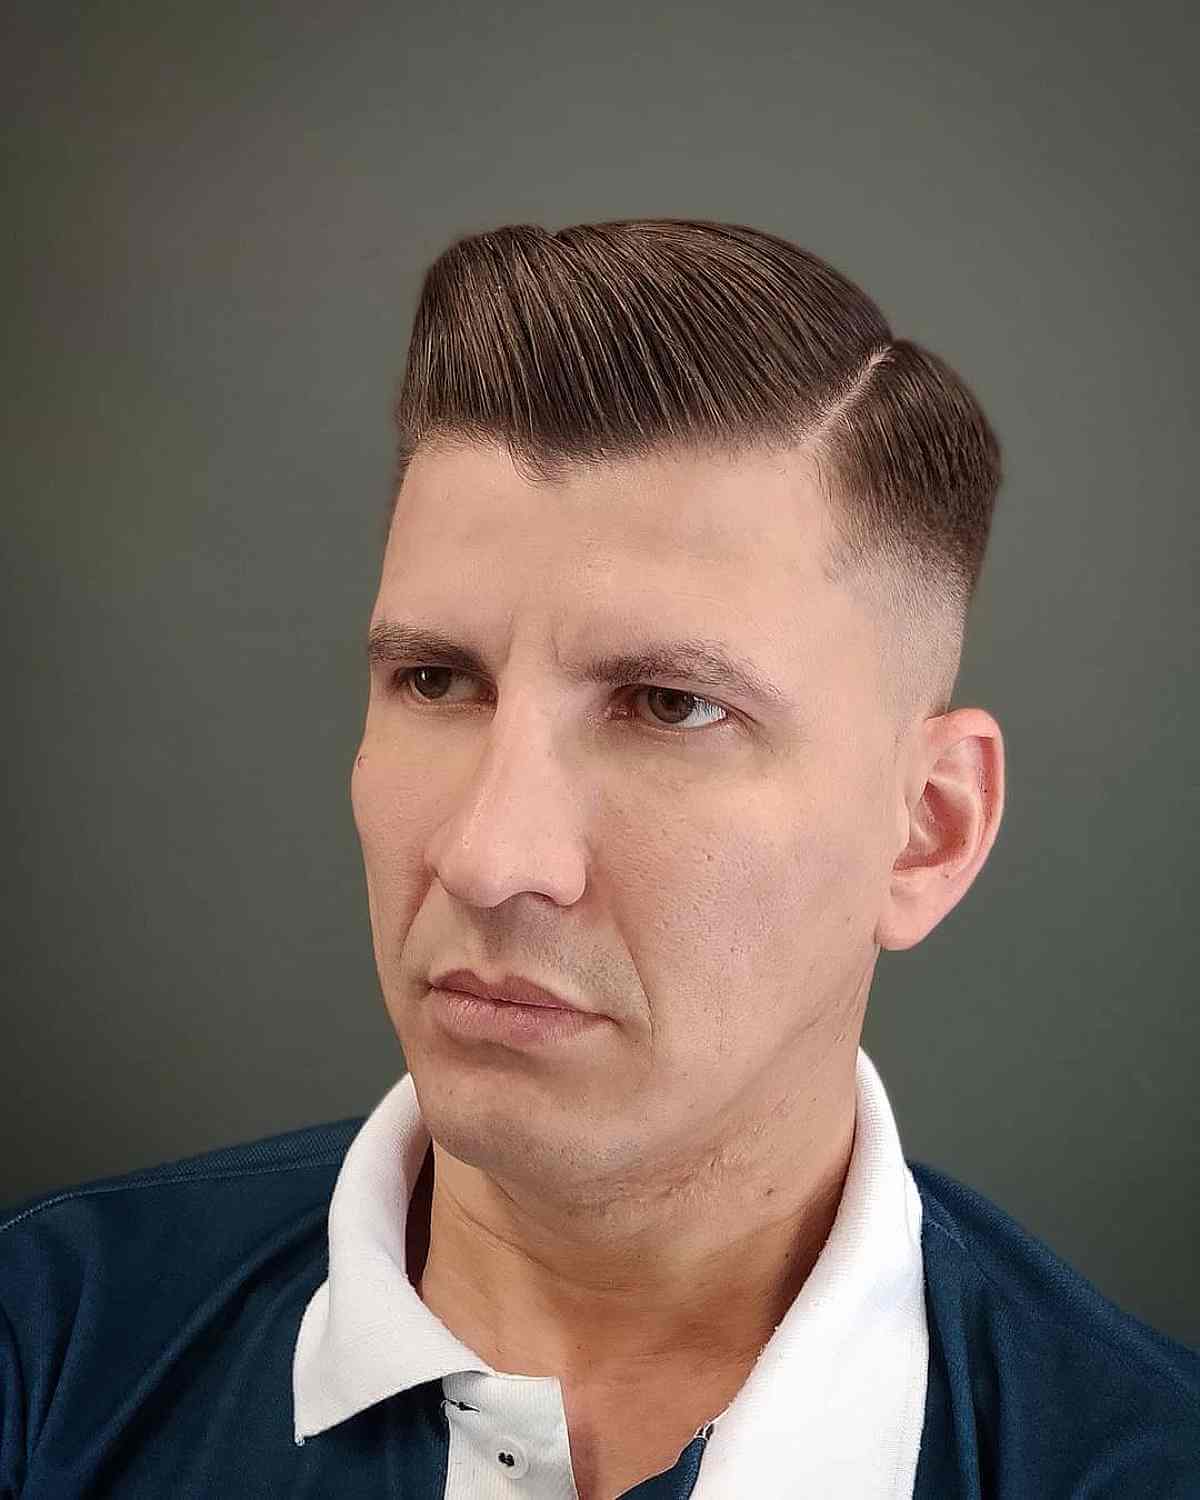 Handsome Ivy league skin fade for dudes